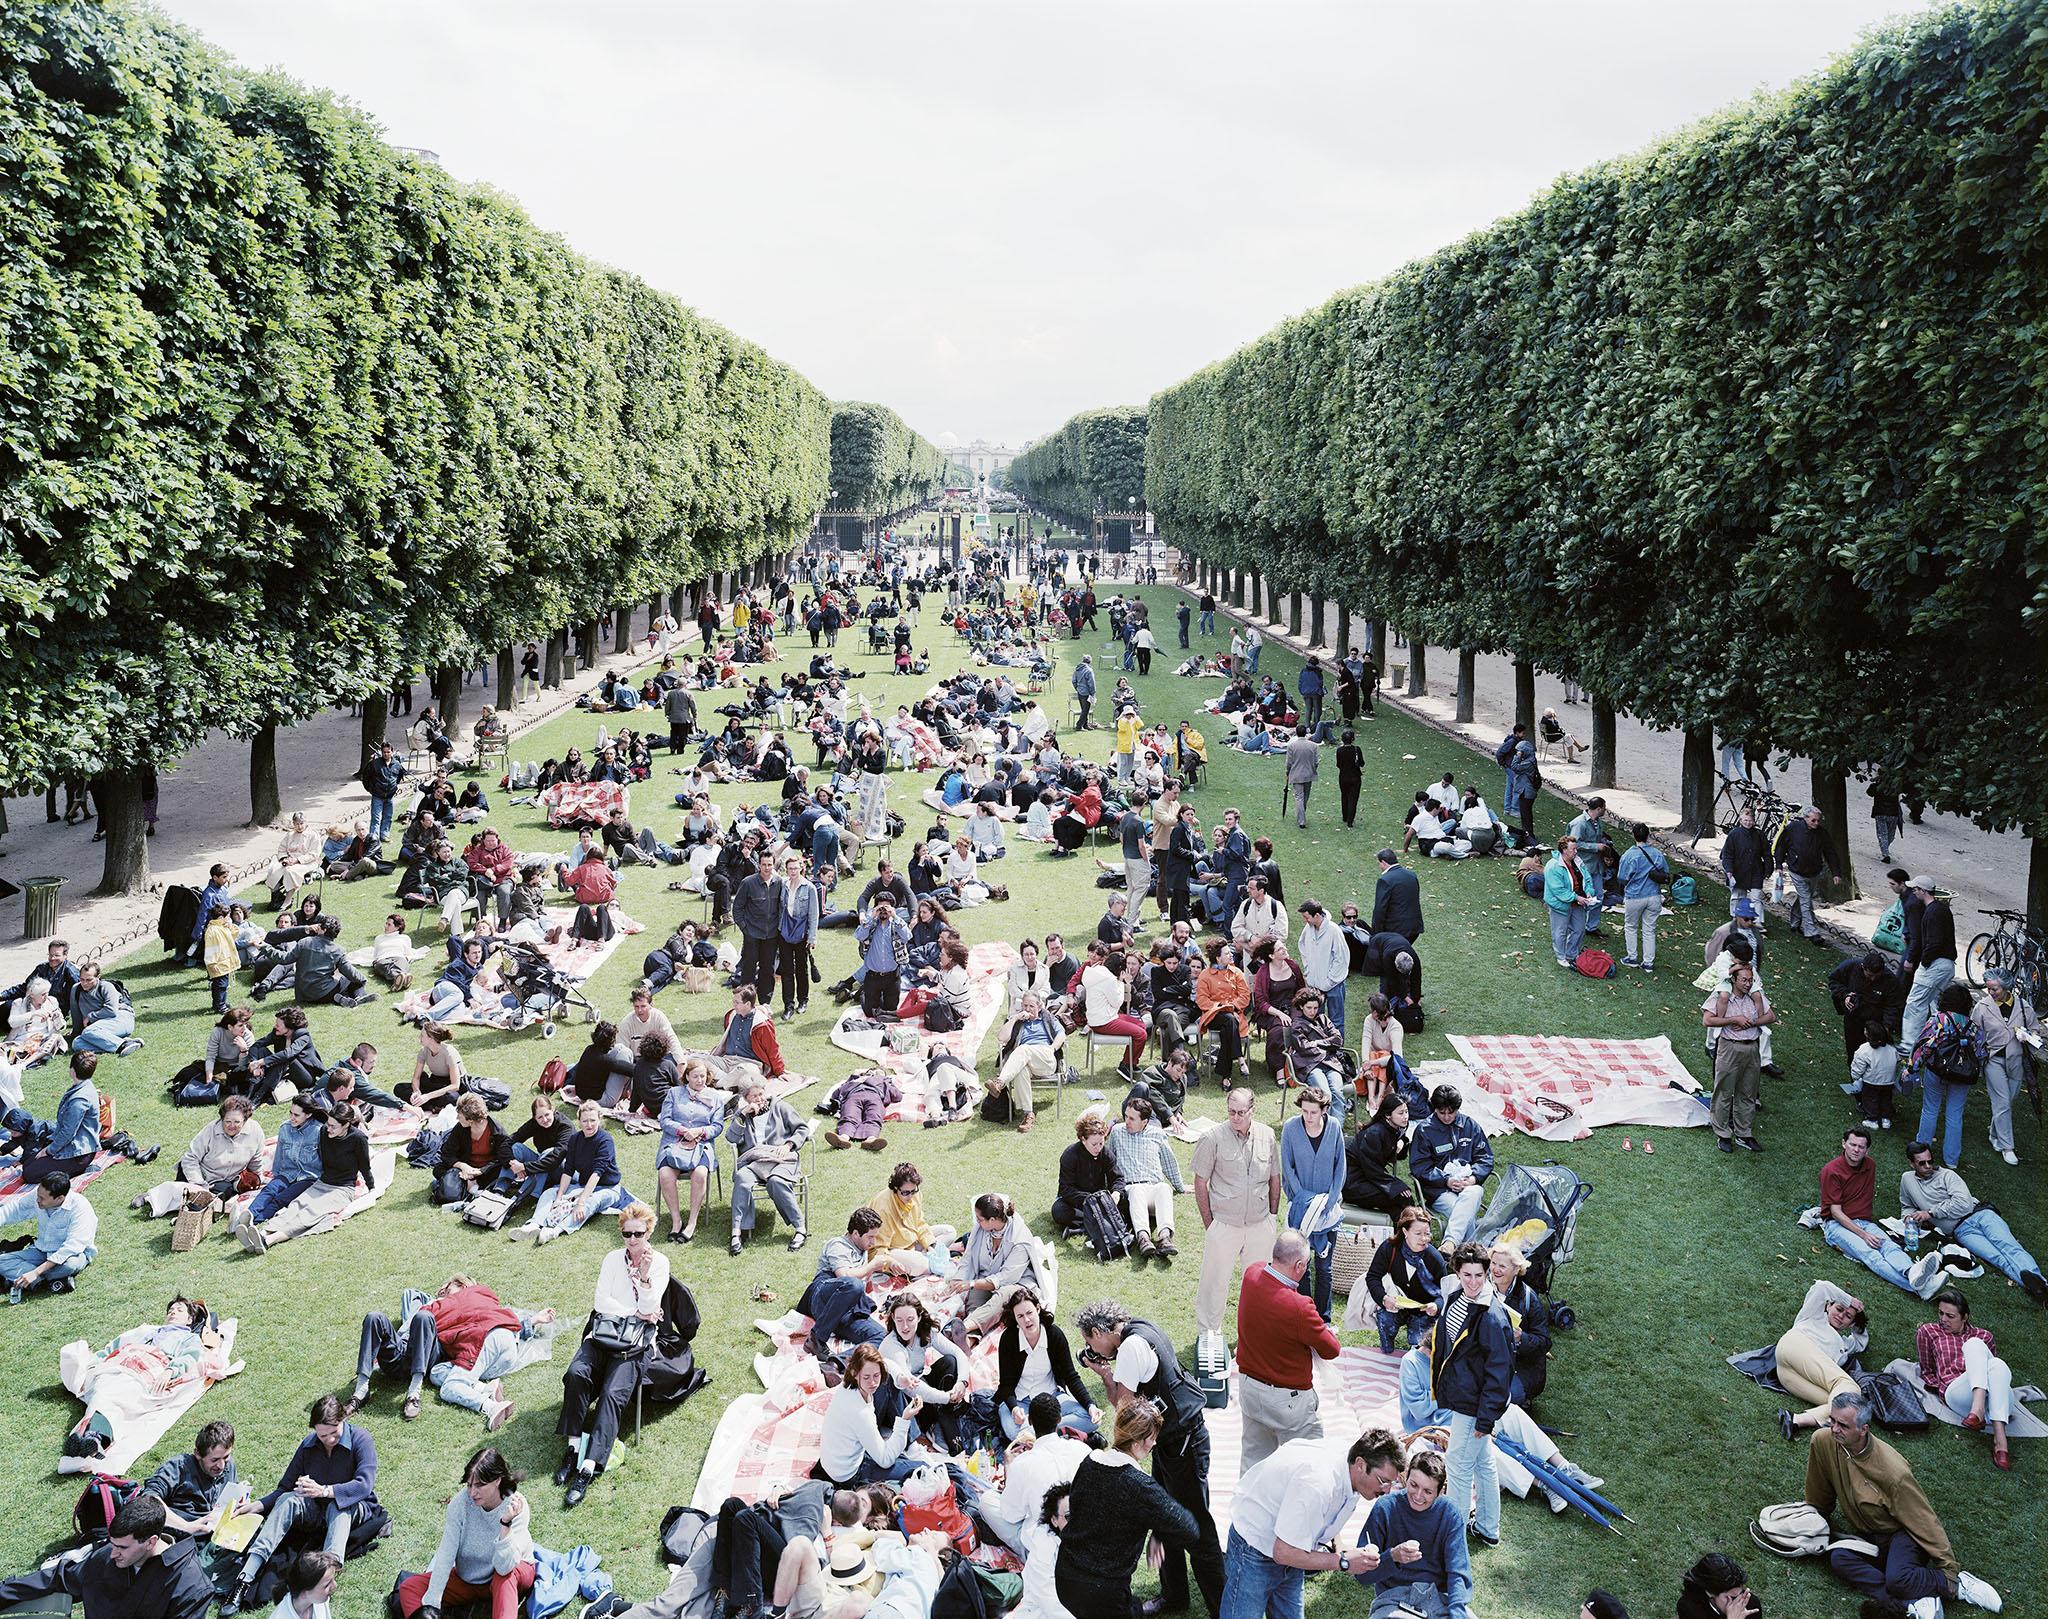 Massimo Vitali - Pic Nic Allée, 2000 by Massimo Vitali a large-format photograph. 
One of the most iconic Vitali's photograph. This art-work was presented at The Venice Biennale in 2011 curated by Harald Szeeman. It is present in some of the most